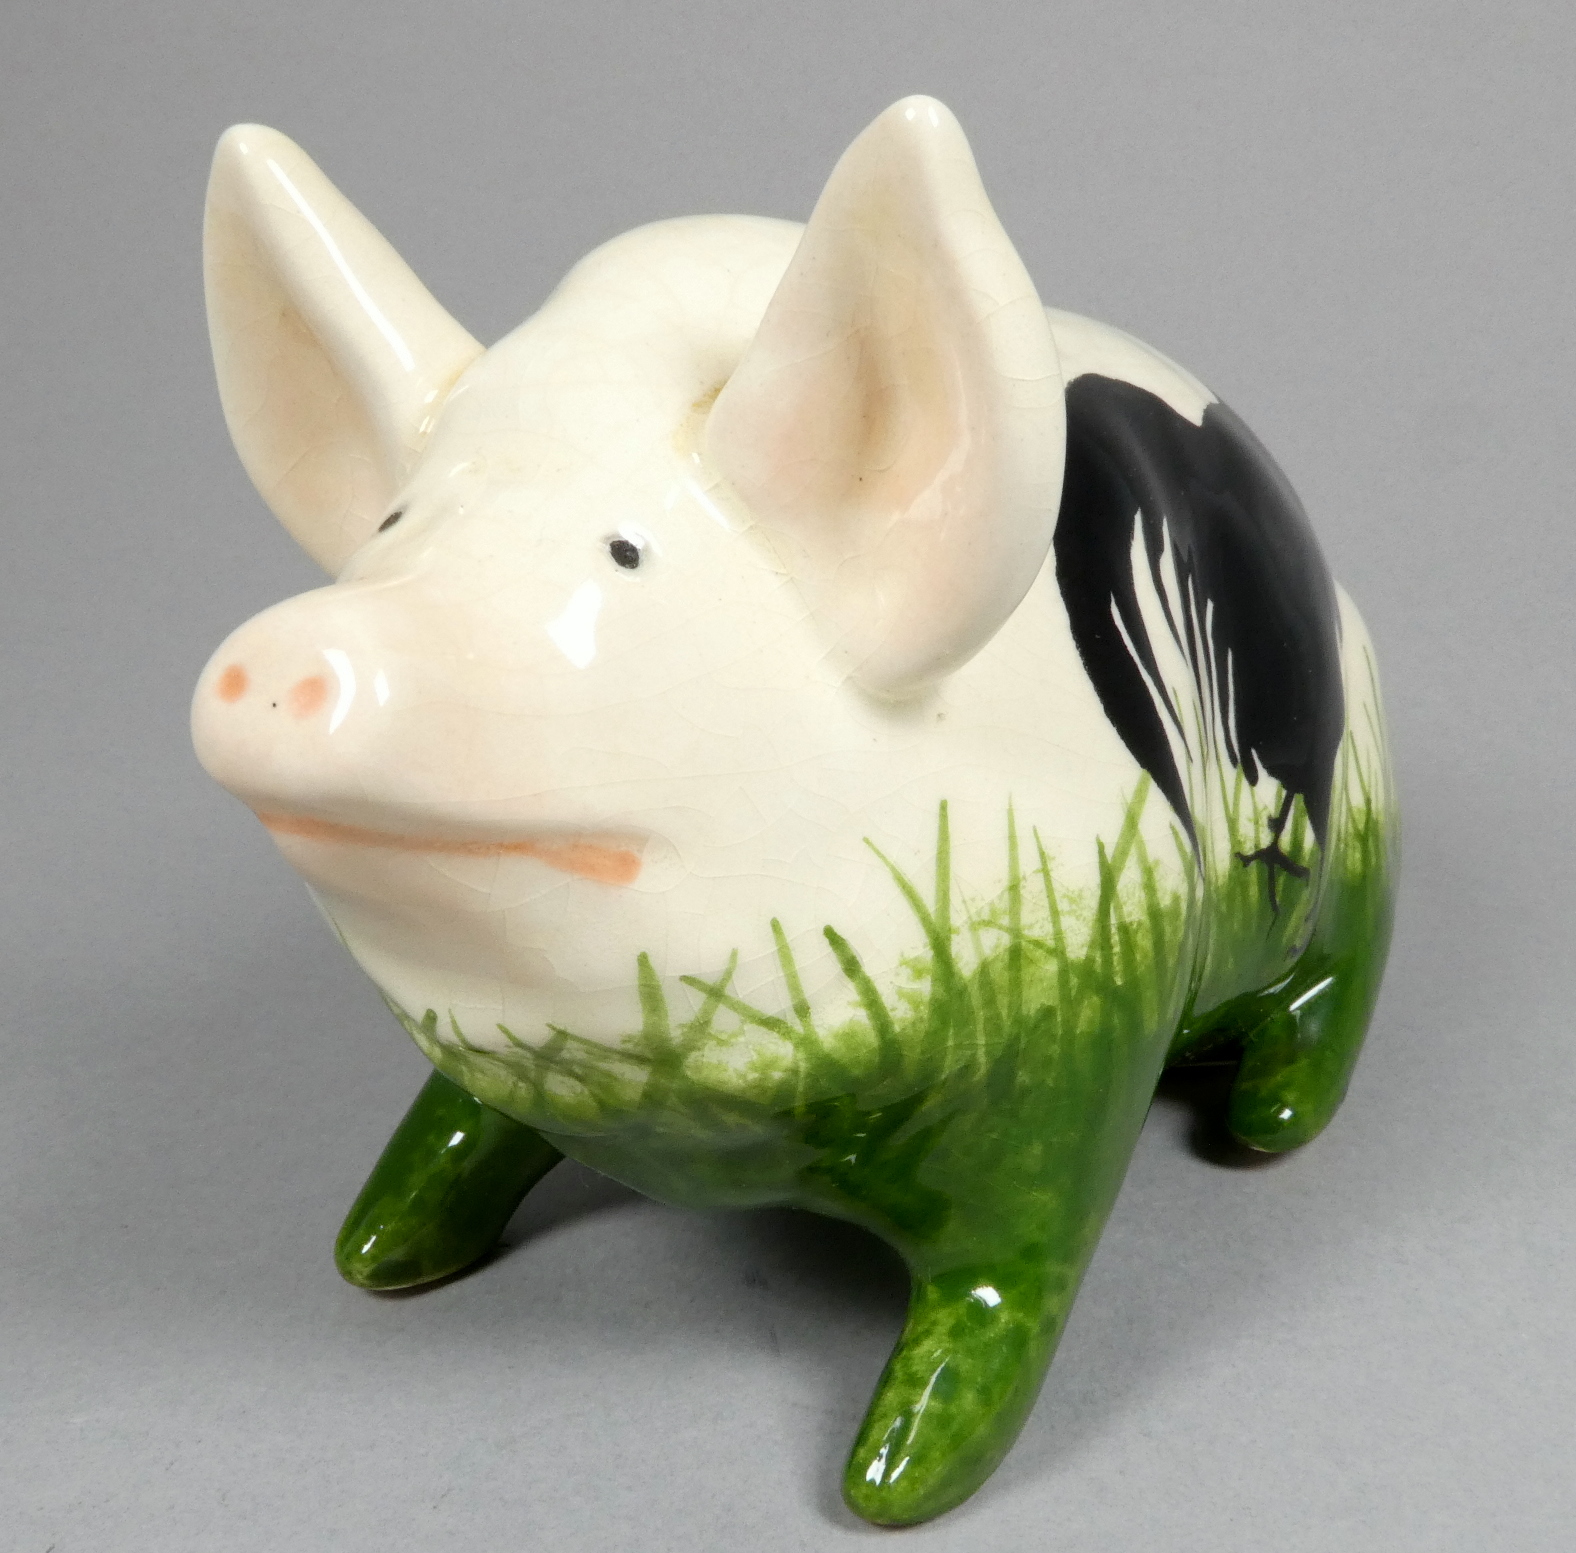 A Wemyss Griselda Hill pottery pig - seated, decorated with black chickens, width 18cm. - Image 2 of 5